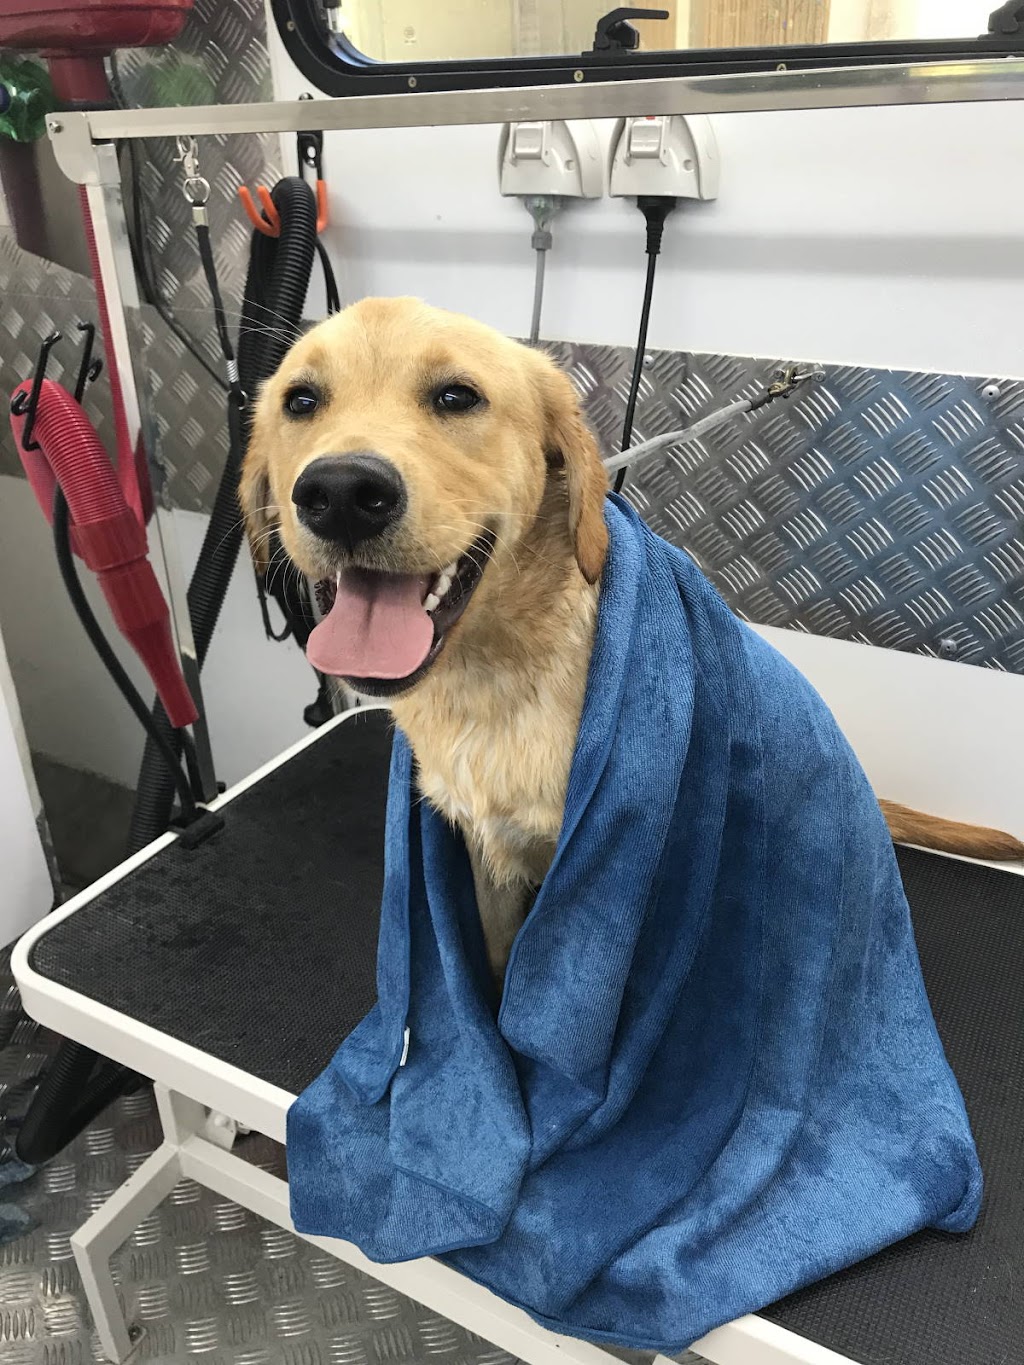 Happy Paws Pet Wash |  | 31 Silvester St, Redcliffe QLD 4020, Australia | 0452233289 OR +61 452 233 289